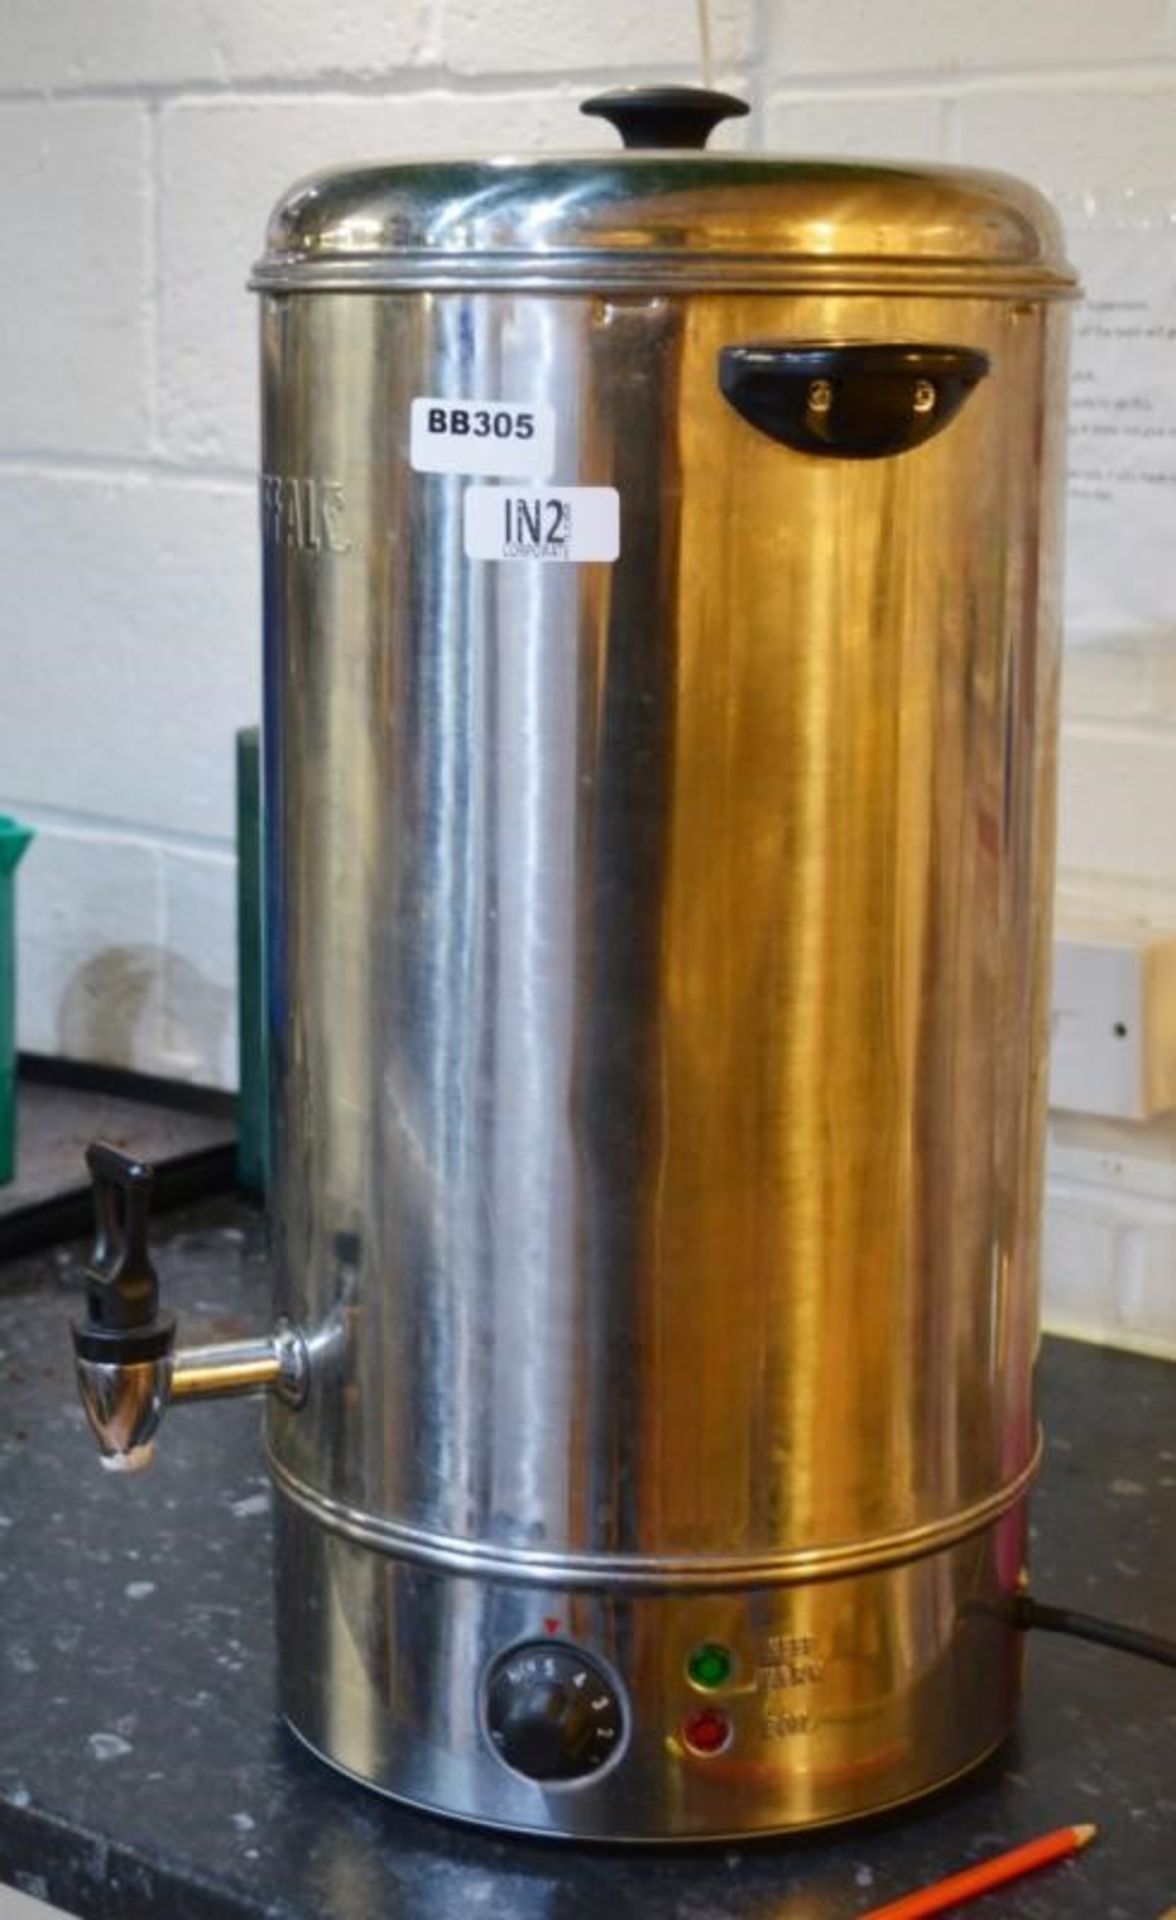 1 x Buffalo GL347 Manual Fill Water Boilet 20 Litre With Stainless Steel Finish - Ref BB305 PTP - CL